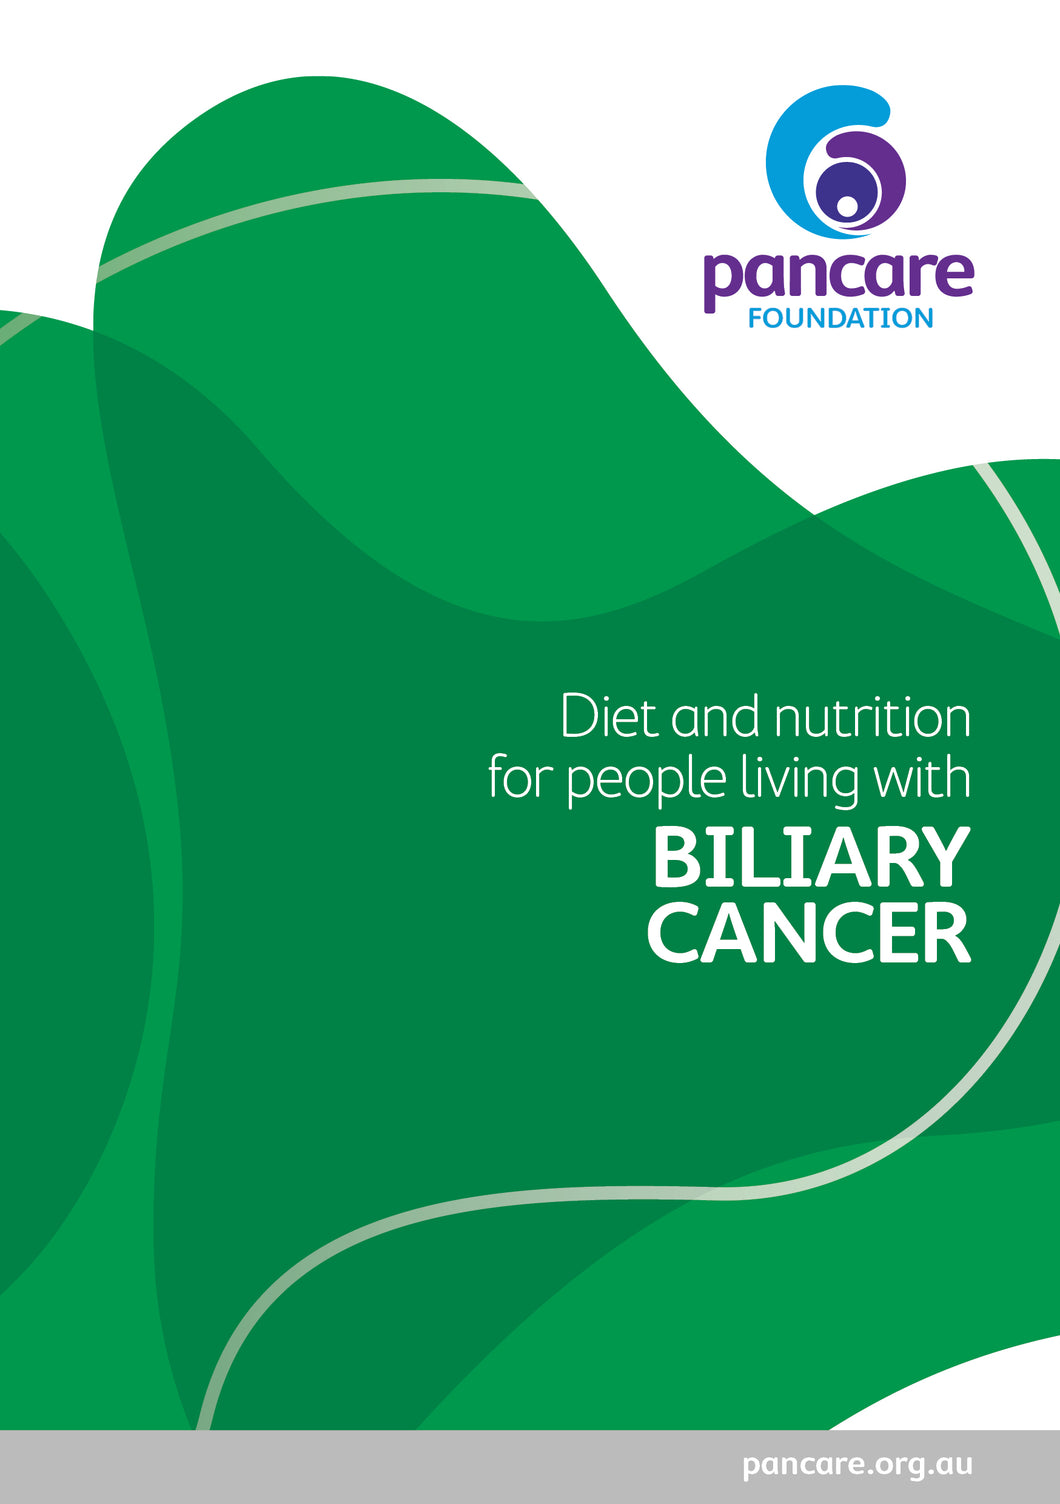 Handbook: Diet and Nutrition for people living with Biliary Cancer